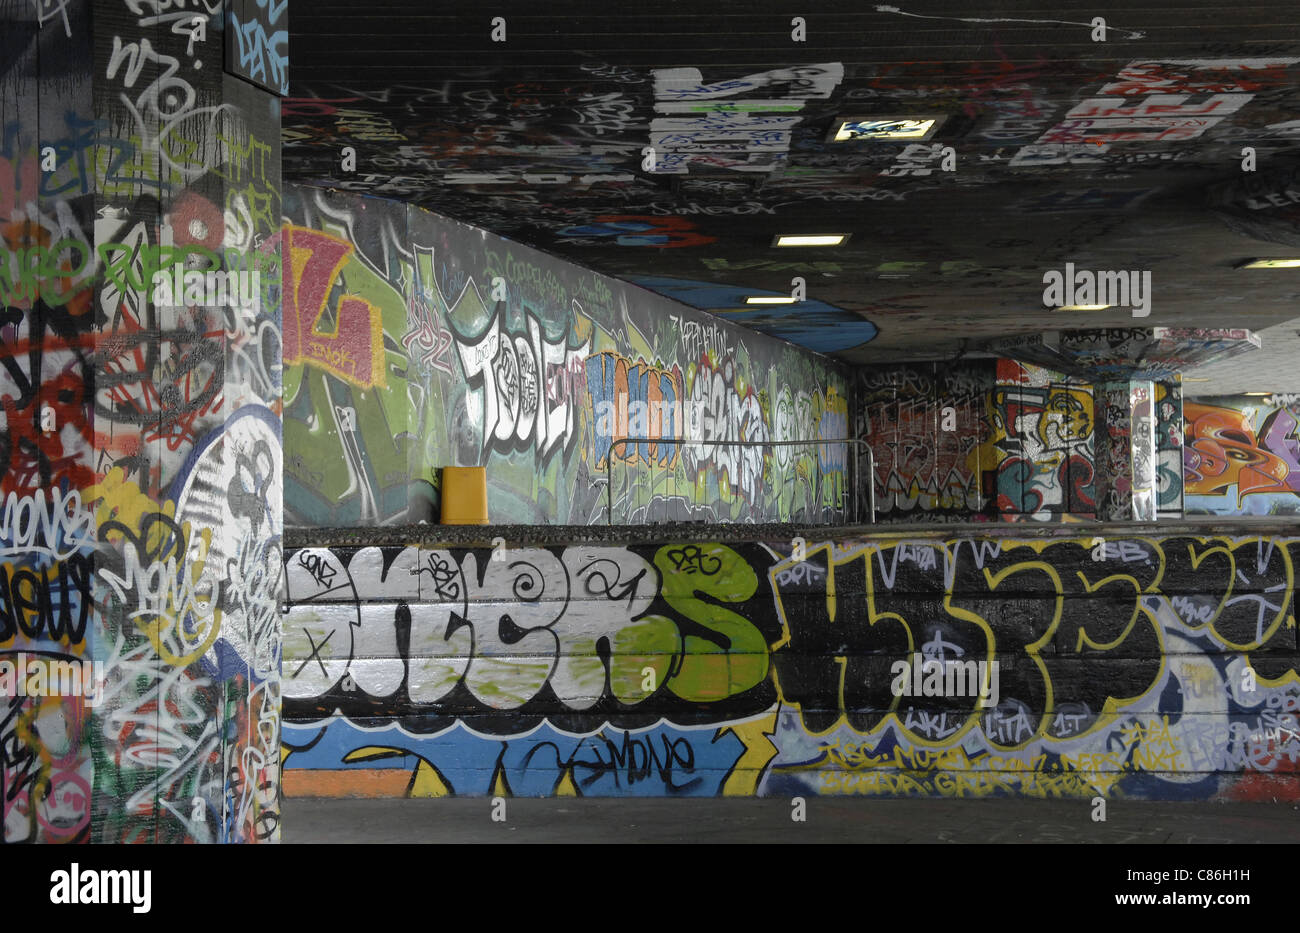 Graffiti and street art in area designated for skateboarders and BMX riders. South Bank of River Thames near Waterloo in London. Stock Photo